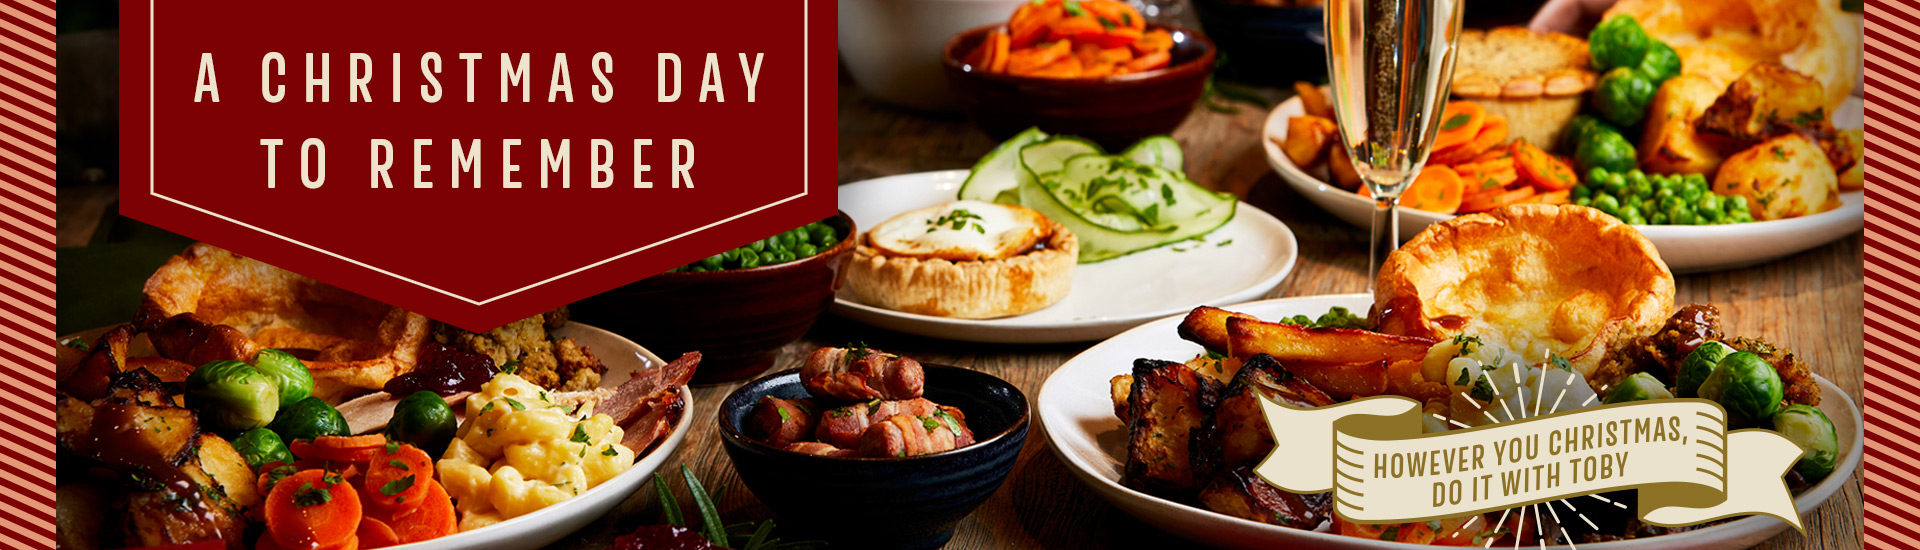 Christmas Day menu at Toby Carvery Cleadon Village